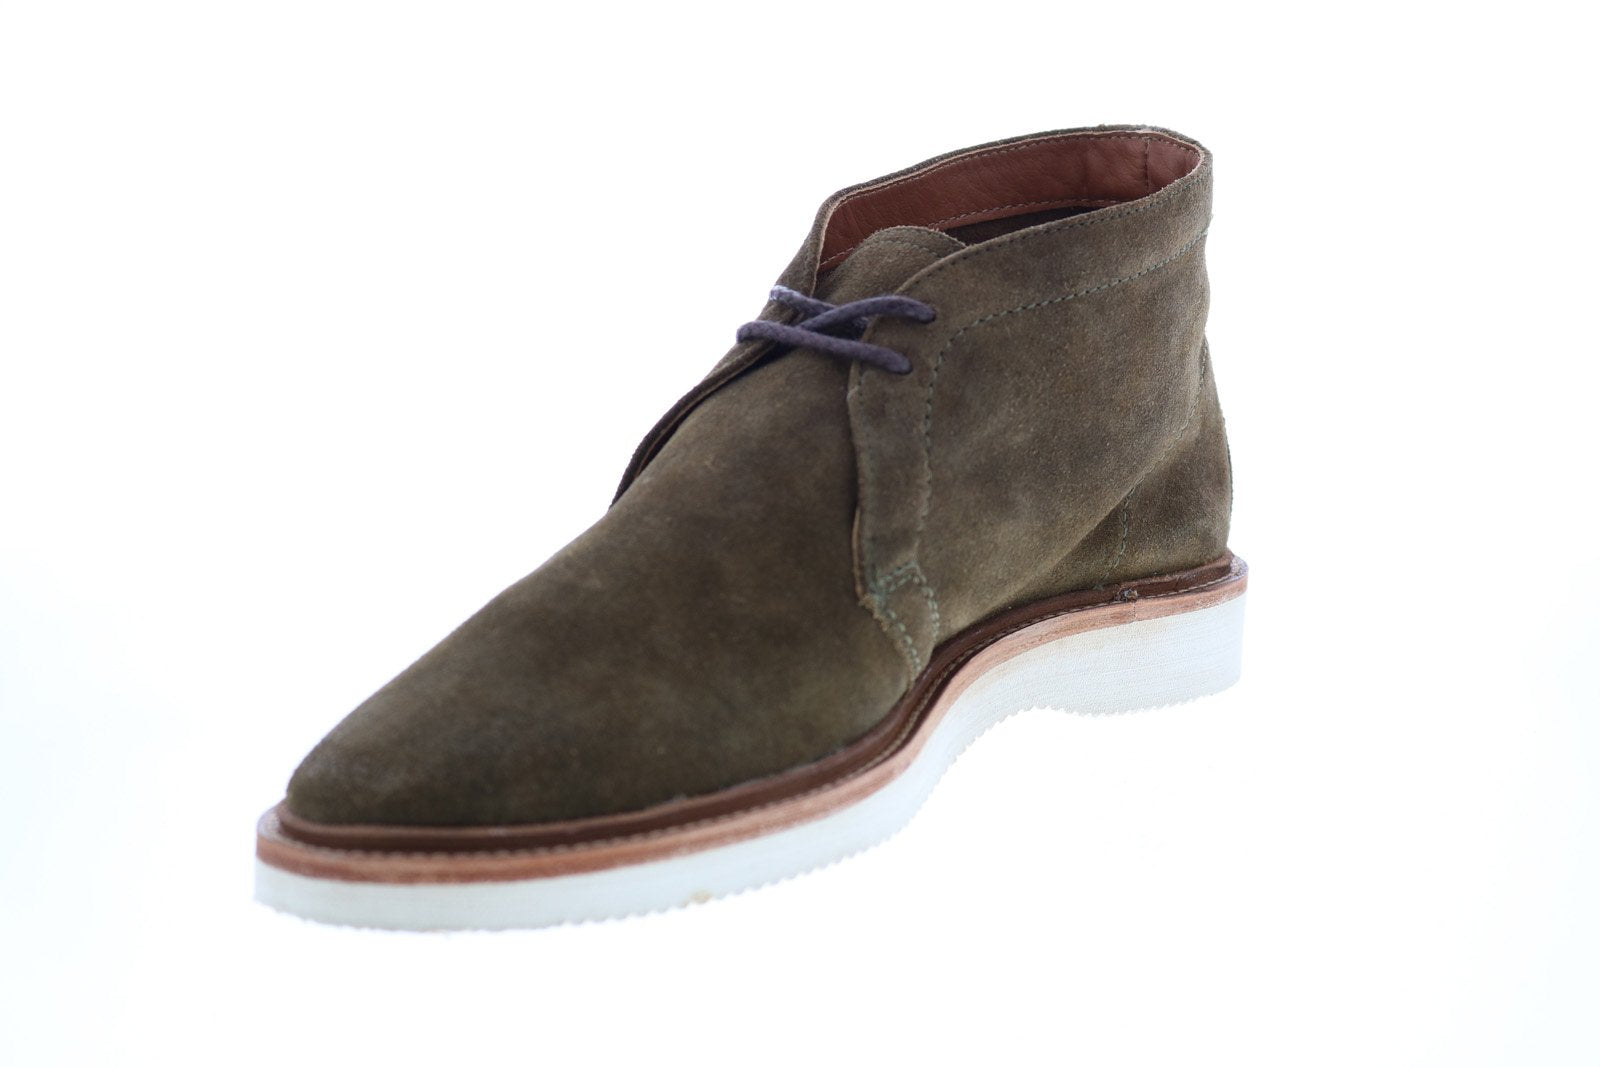 Frye Paul Light Chukka 80761 Mens Brown Suede Lace Up Chukkas Boots ...